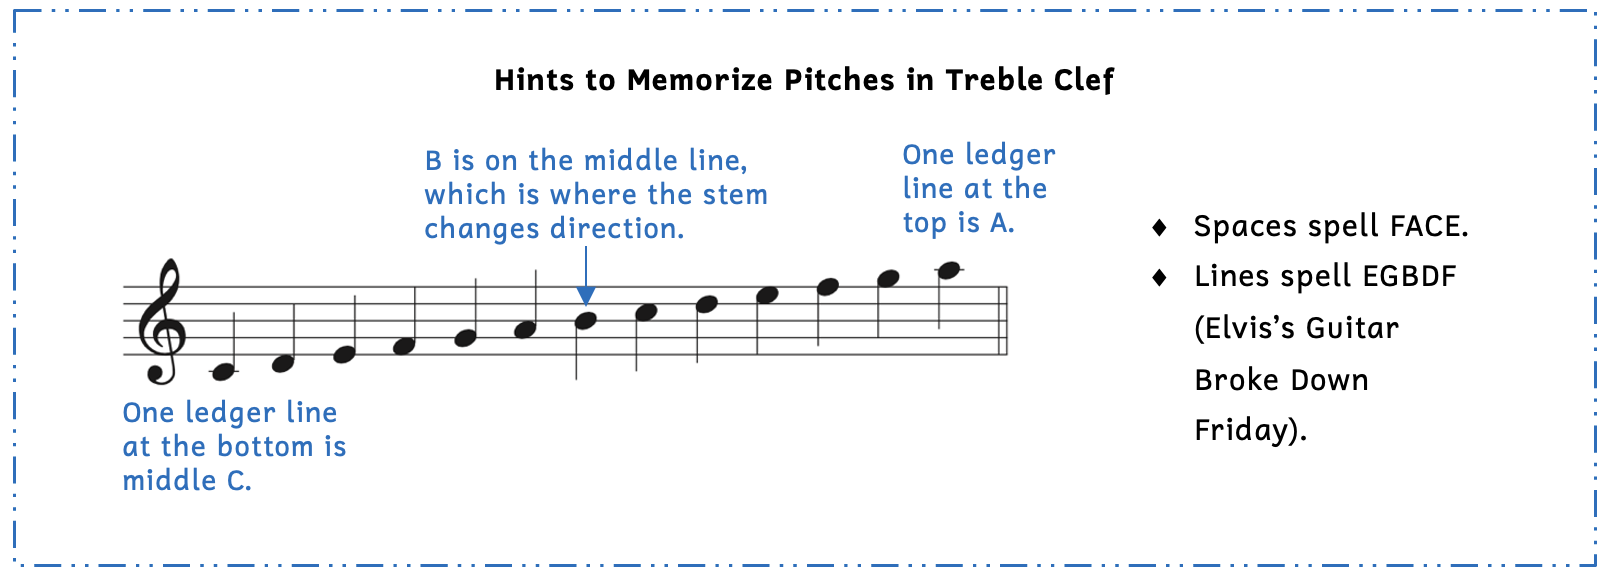 Summary box with hints to memorize pitches in treble clef are shown. One ledger line below the staff is middle C. The quarter note on middle C has a stem that is to the right of the notehead and is pointed up. Notes ascending from middle C continue to have stems pointing up until B, which falls on the middle line. The stem on that B is to the left of the notehead and is pointed down. Notes ascending from B continue to have stems pointing down until A, which is located one ledger line above the staff. The spaces of the staff in treble clef spell F, A, C, E, and the lines spell E, G, B, D, F, or Elvis's Guitar Broke Down Friday.